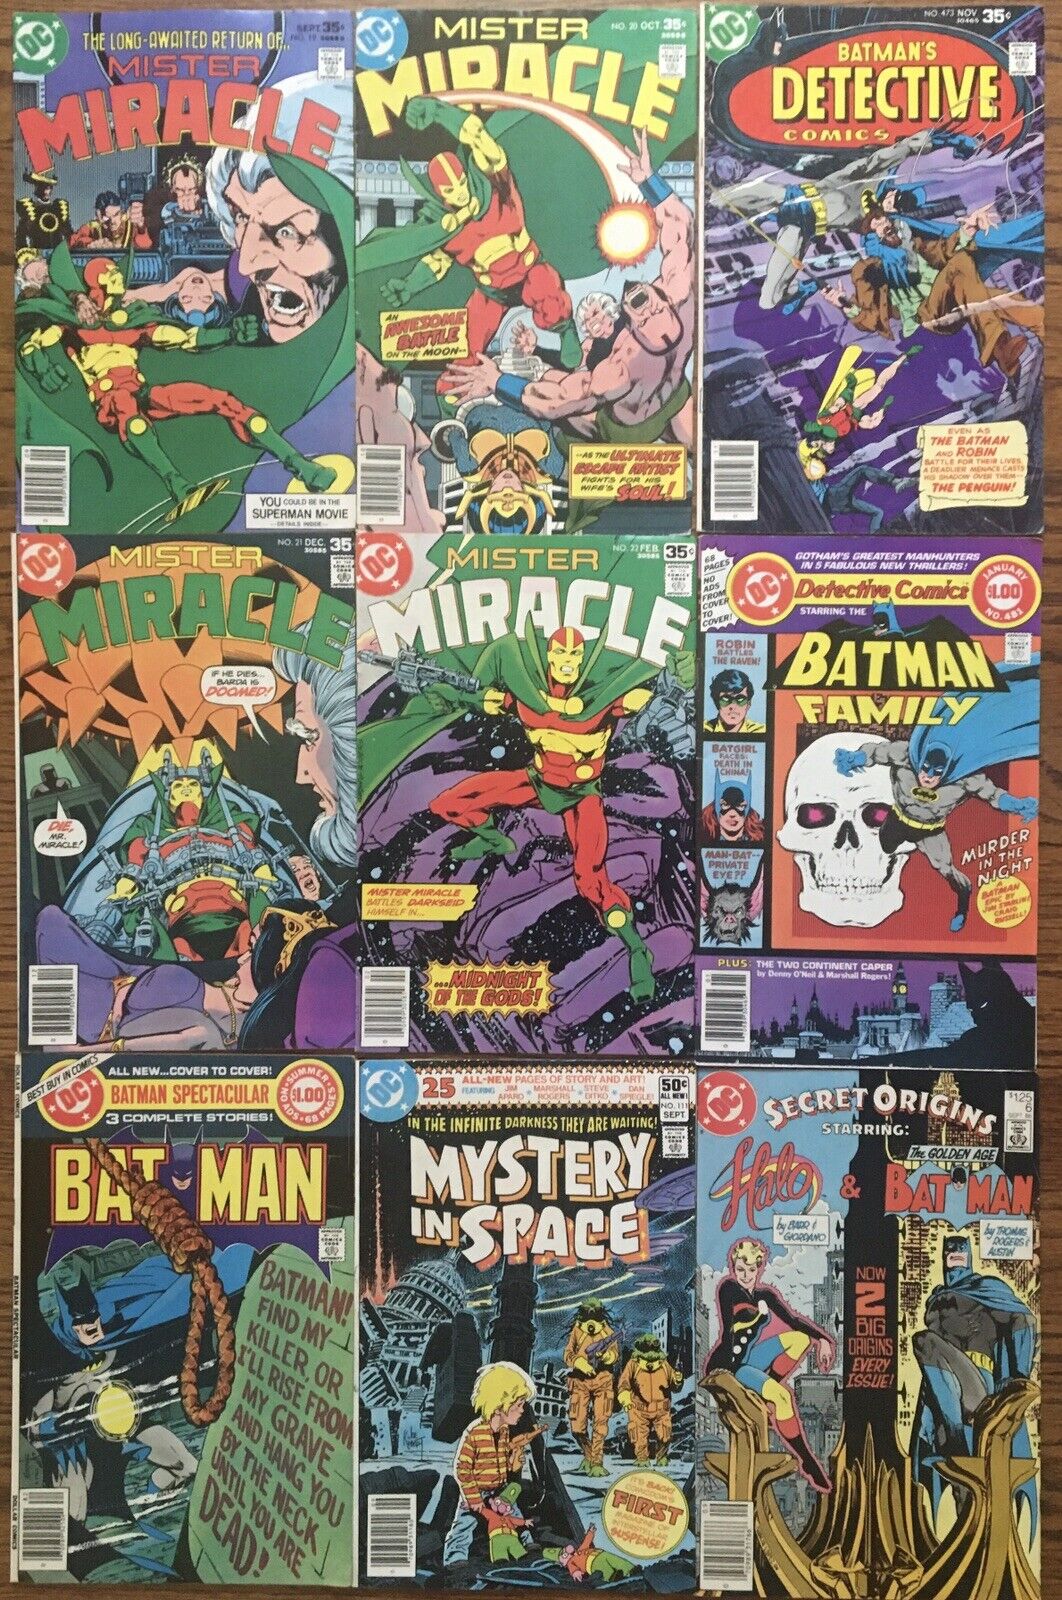 Detective Comics #473 481 Mr. Miracle 19-22 DC Special Series 15 Marshall Rogers